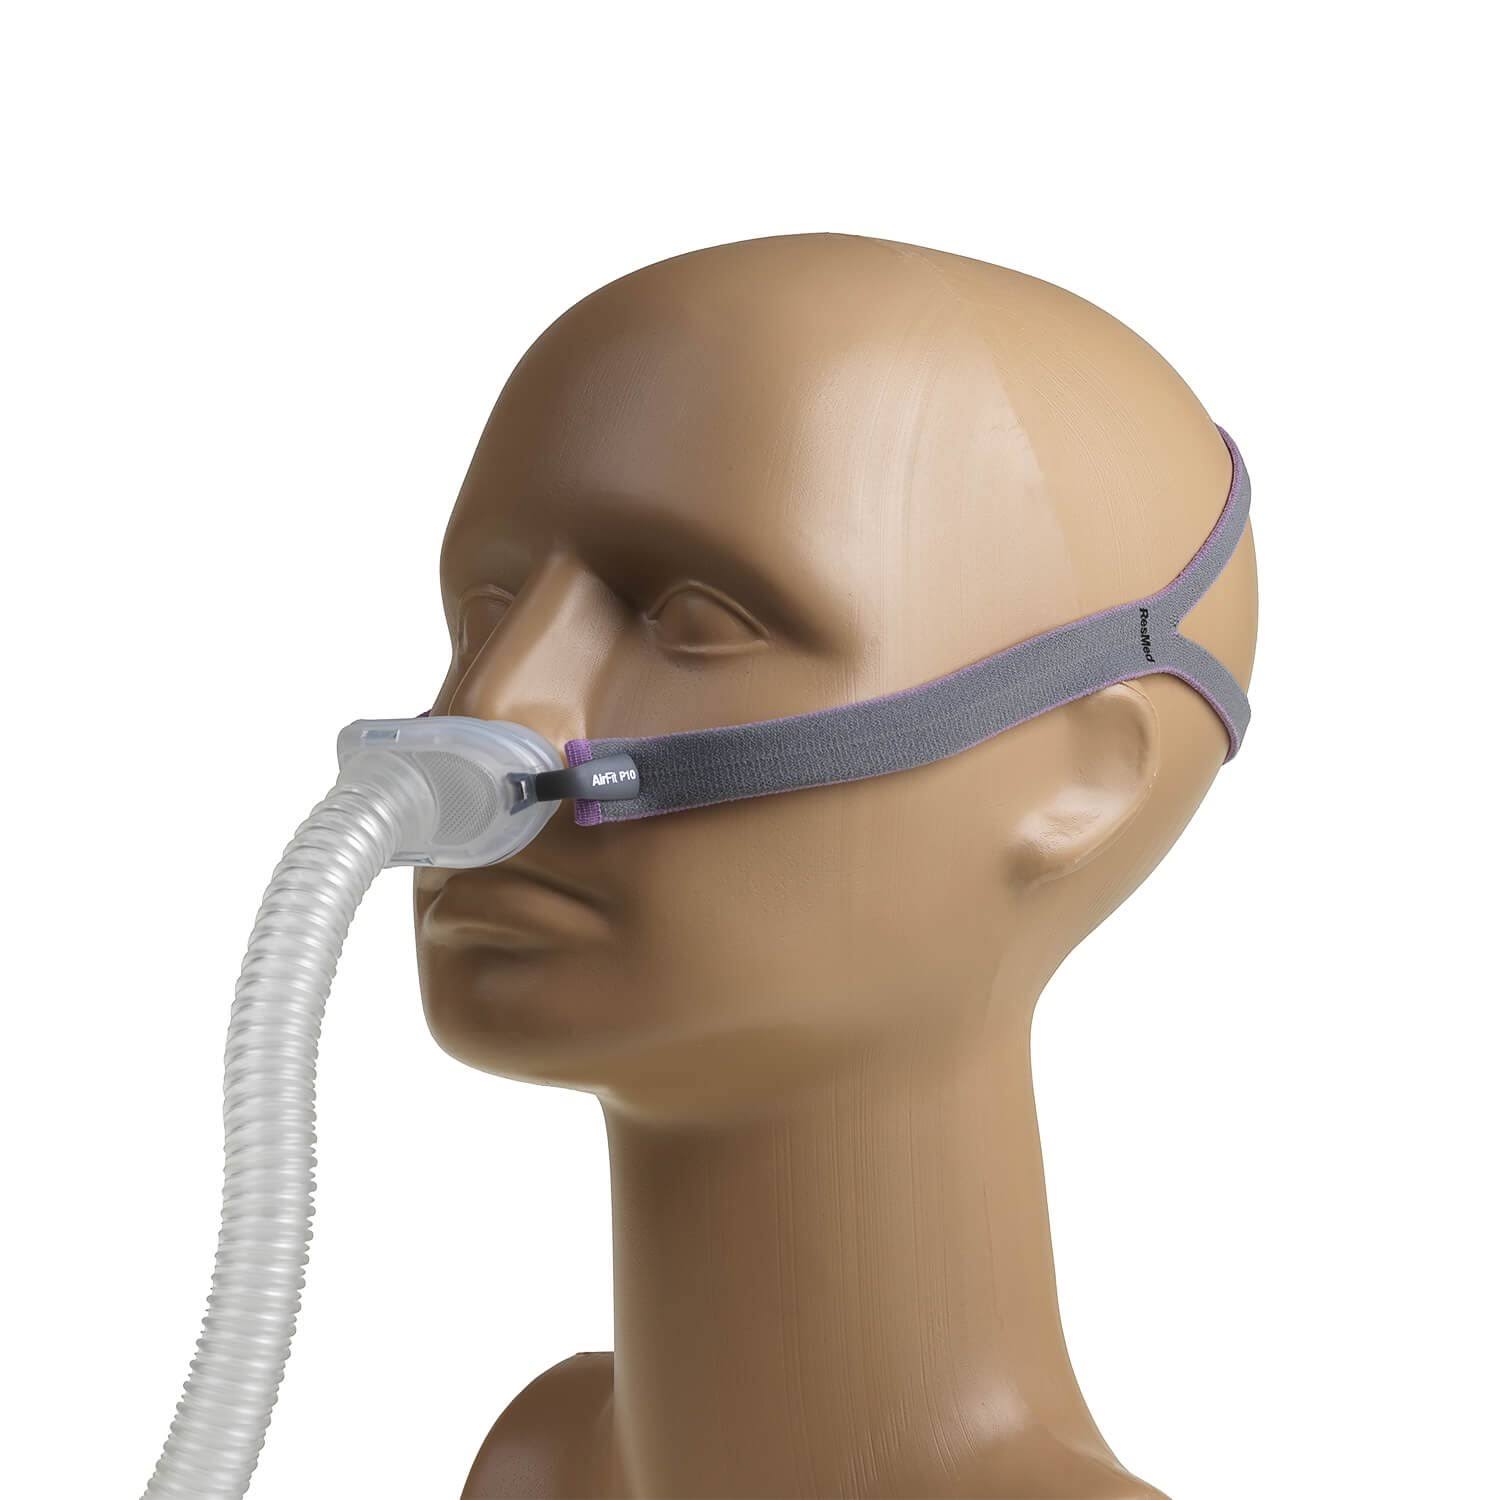 ResMed 35% Off - New AirFit P10 Nasal Pillow CPAP Mask with Headgear, Size S